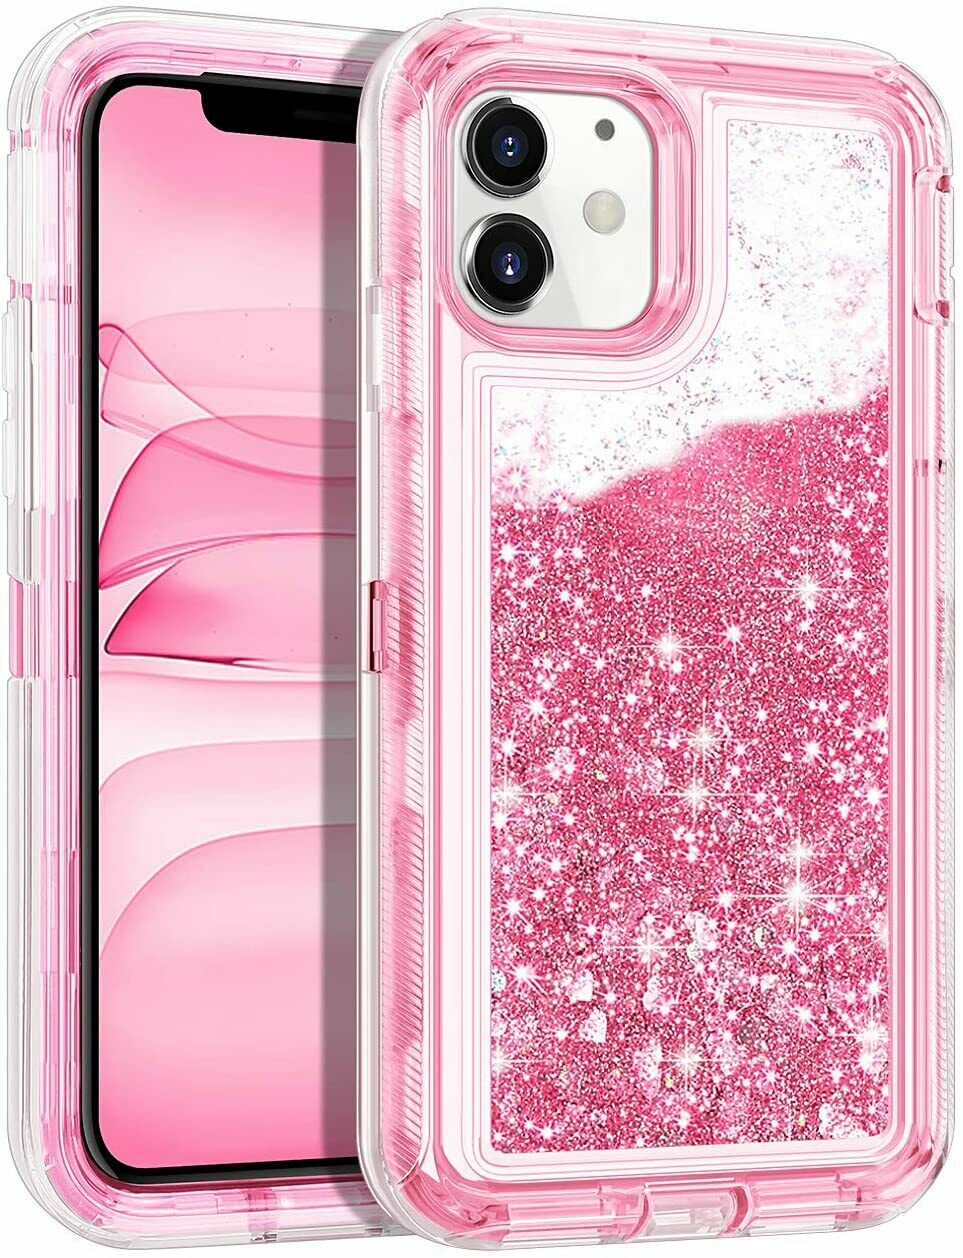 iPHONE 11 (6.1in) Star Dust Glitter Liquid Clear Robot Case Two Tone (Silver Pink)